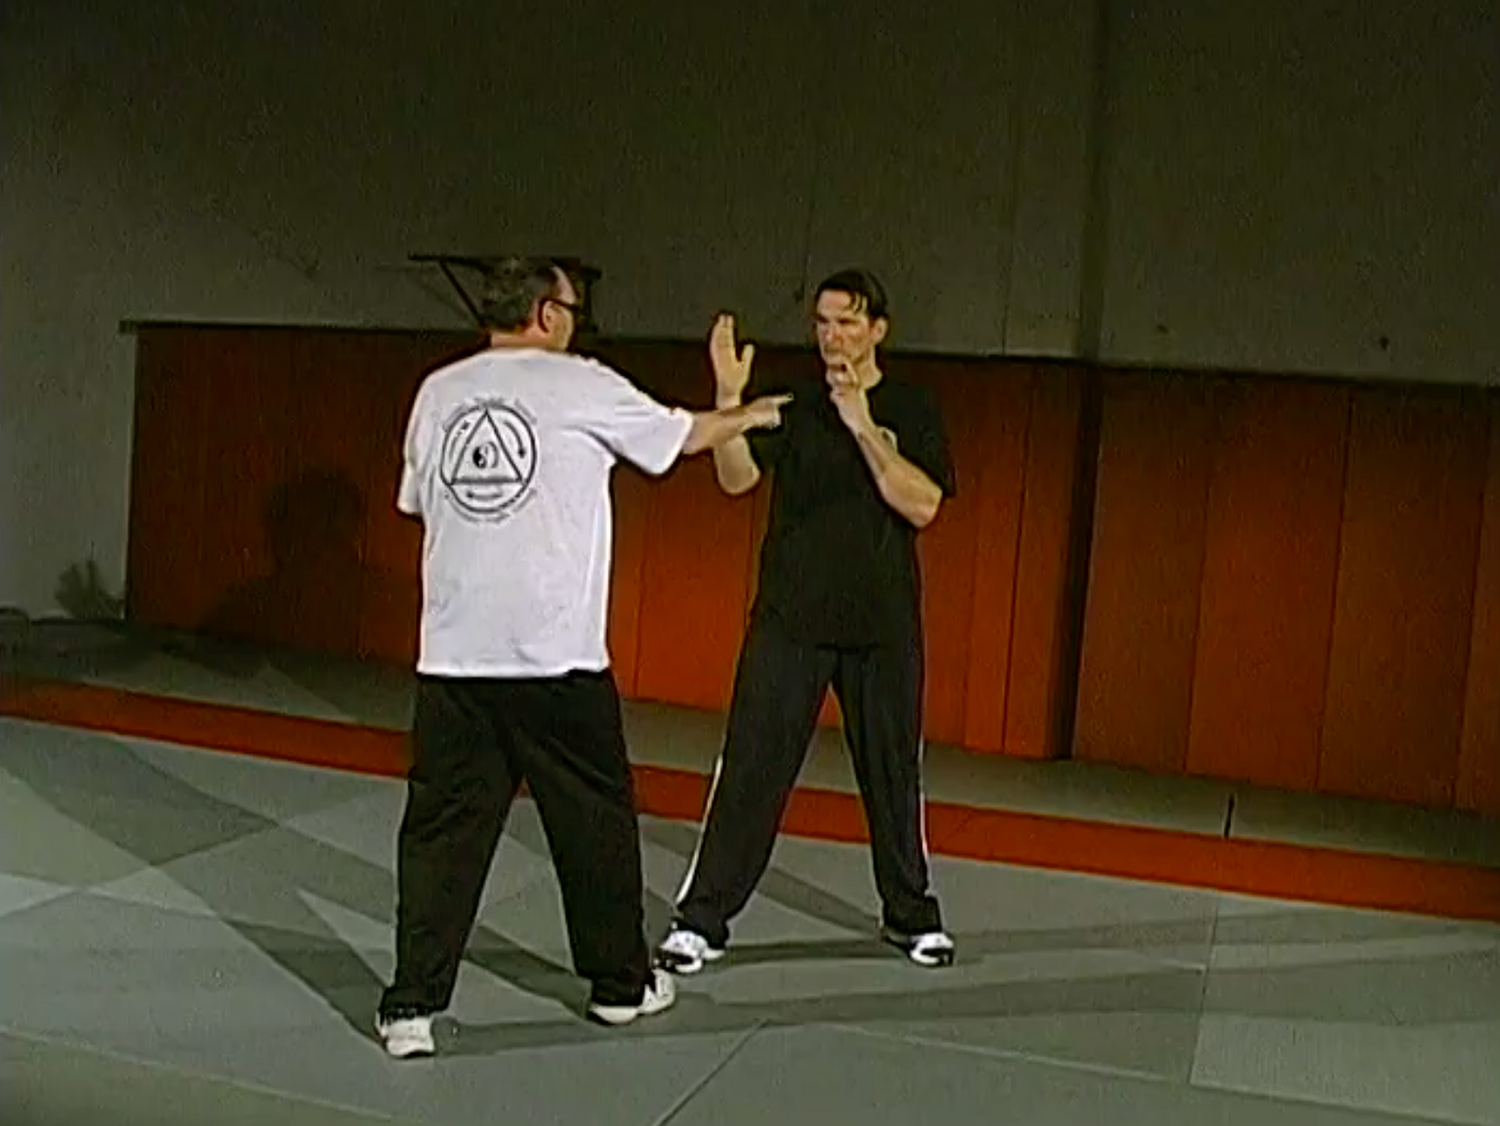 Jeet Kune Do Trapping Hands For Combat DVD with Tim Tackett